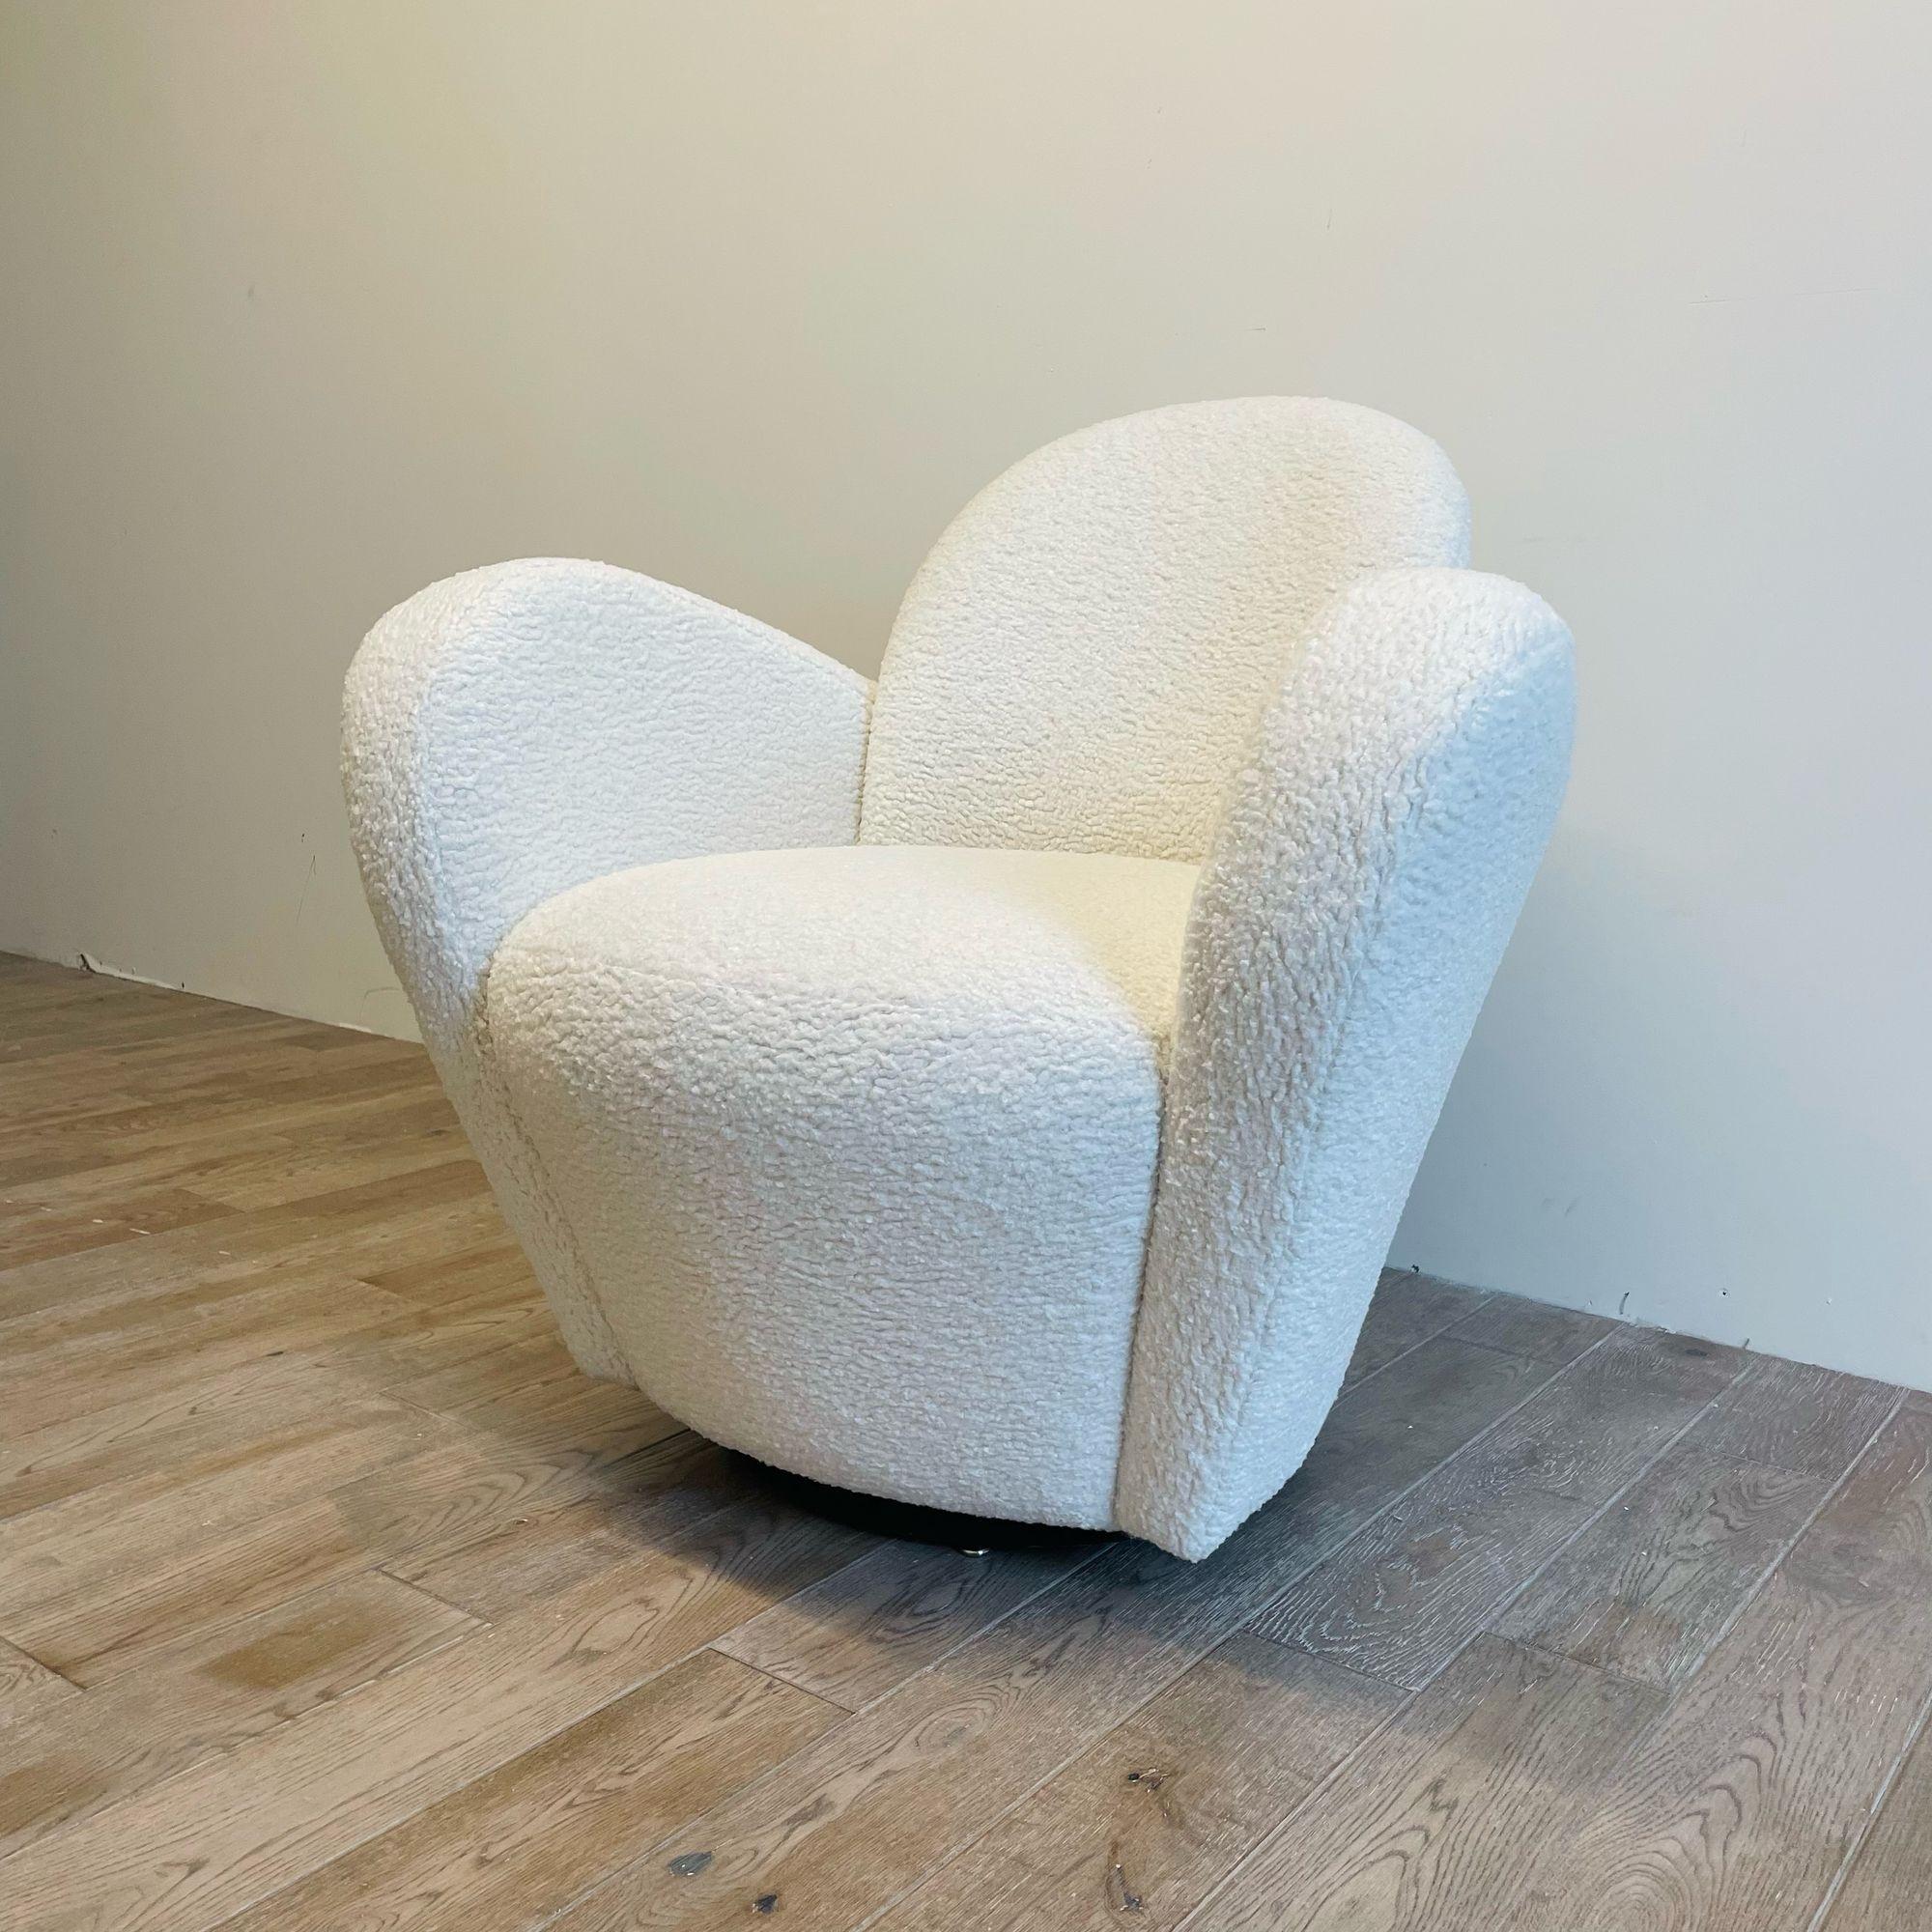 Mid-Century Modern Swivel / Lounge Chair, Michael Wolk, Boucle
 
Single organic form swivel chair newly upholstered in a luxurious white textured boucle fabric. This chair is similar in form to Vladimir Kagan's wrap around barrel swivel chair. Later